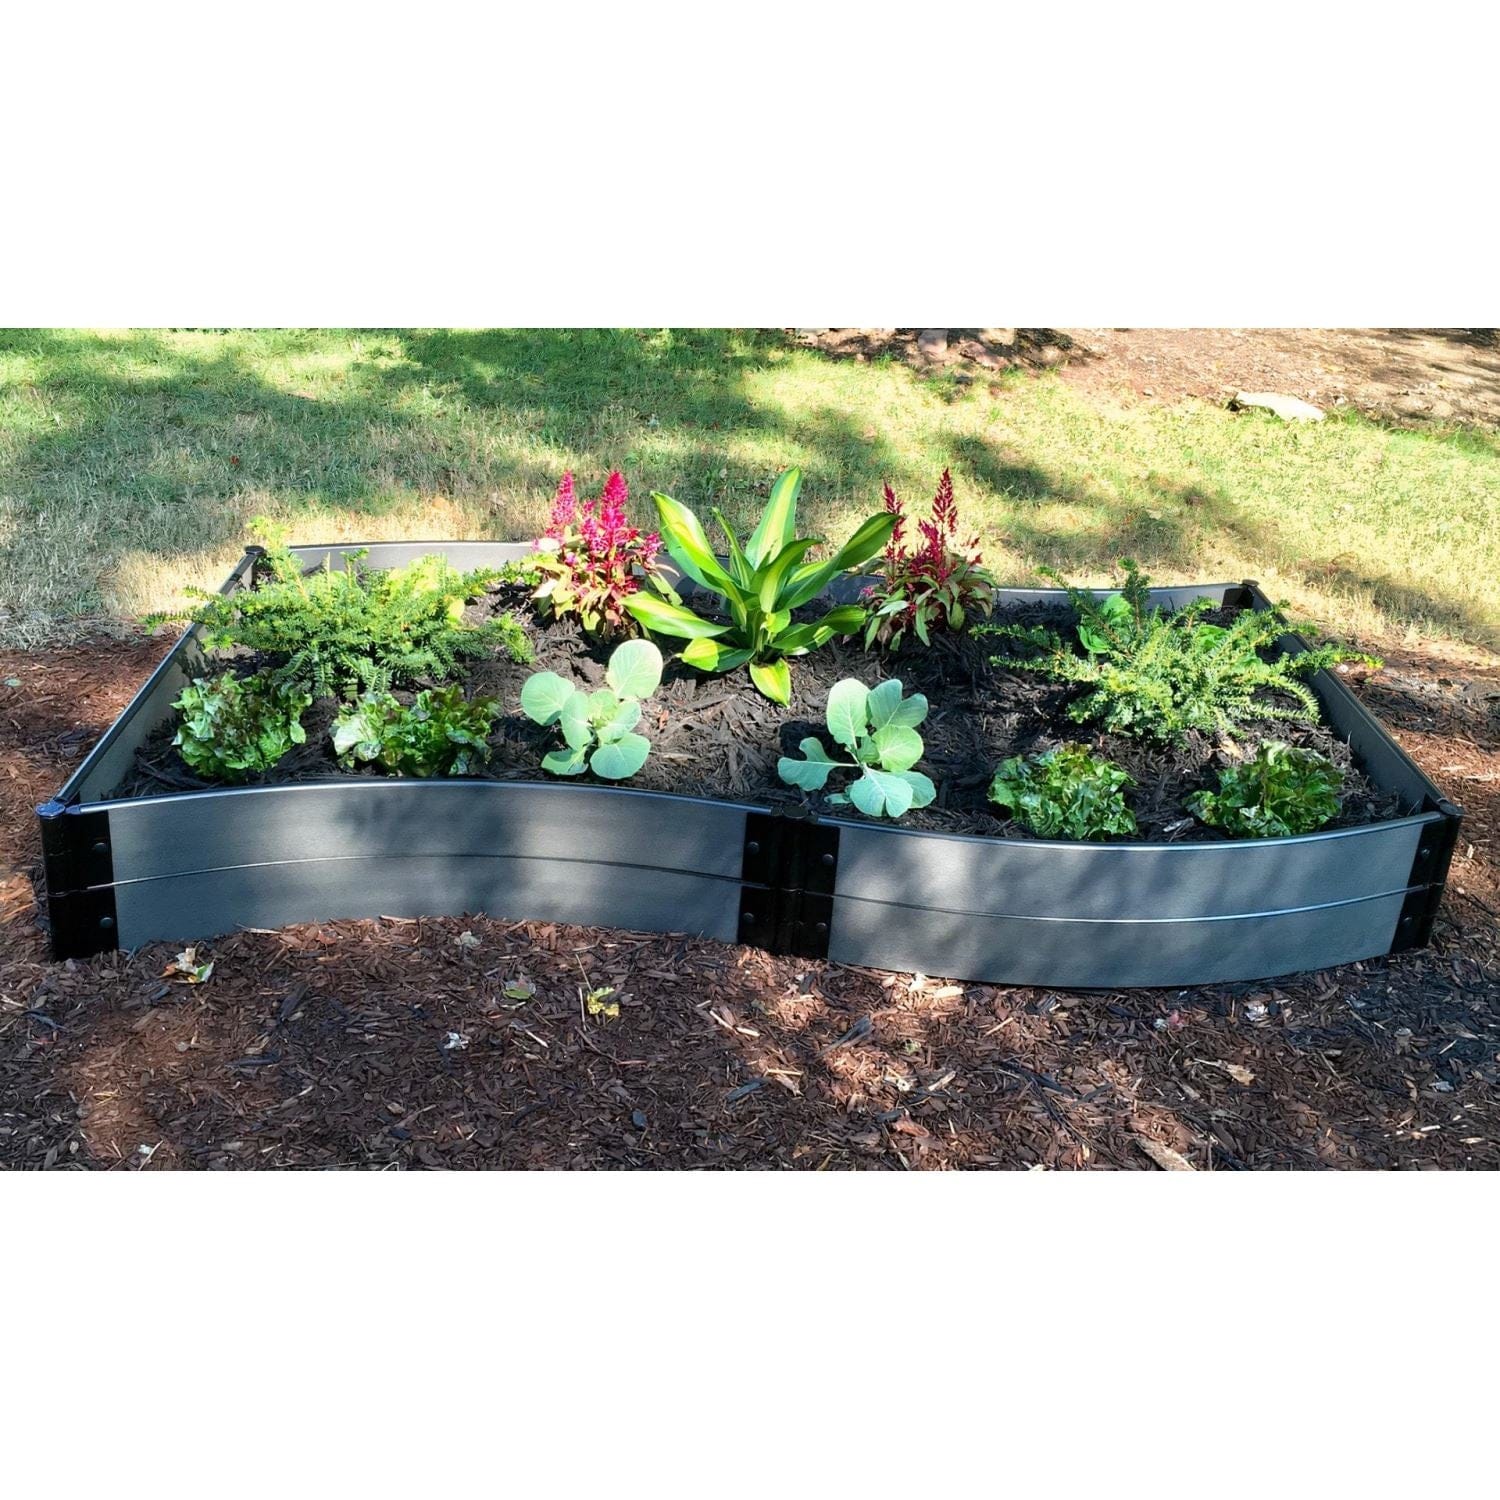 Frame It All Gardening Accessories Frame It All | Tool-Free Wavy Navy Raised Garden Bed 4' X 8' X 11" - Uptown Brown - 1" Profile 800002073